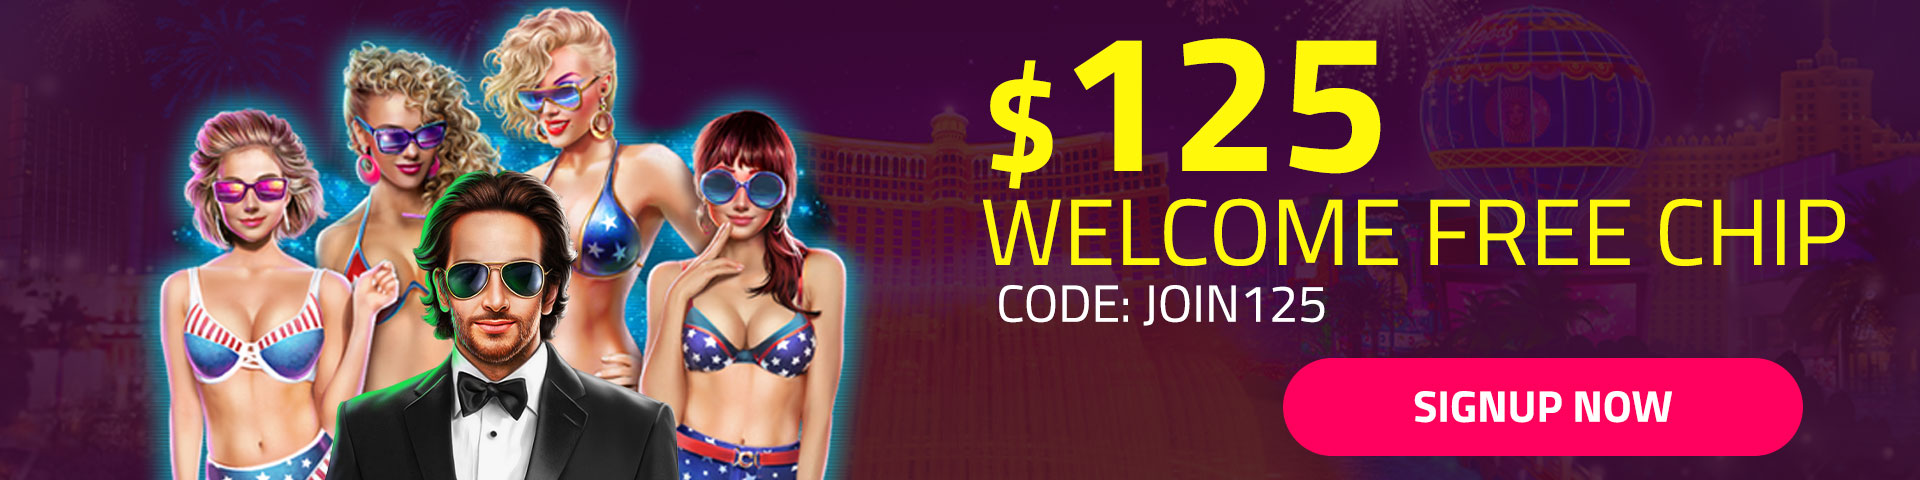 Welcome 125 Free Chip Signup